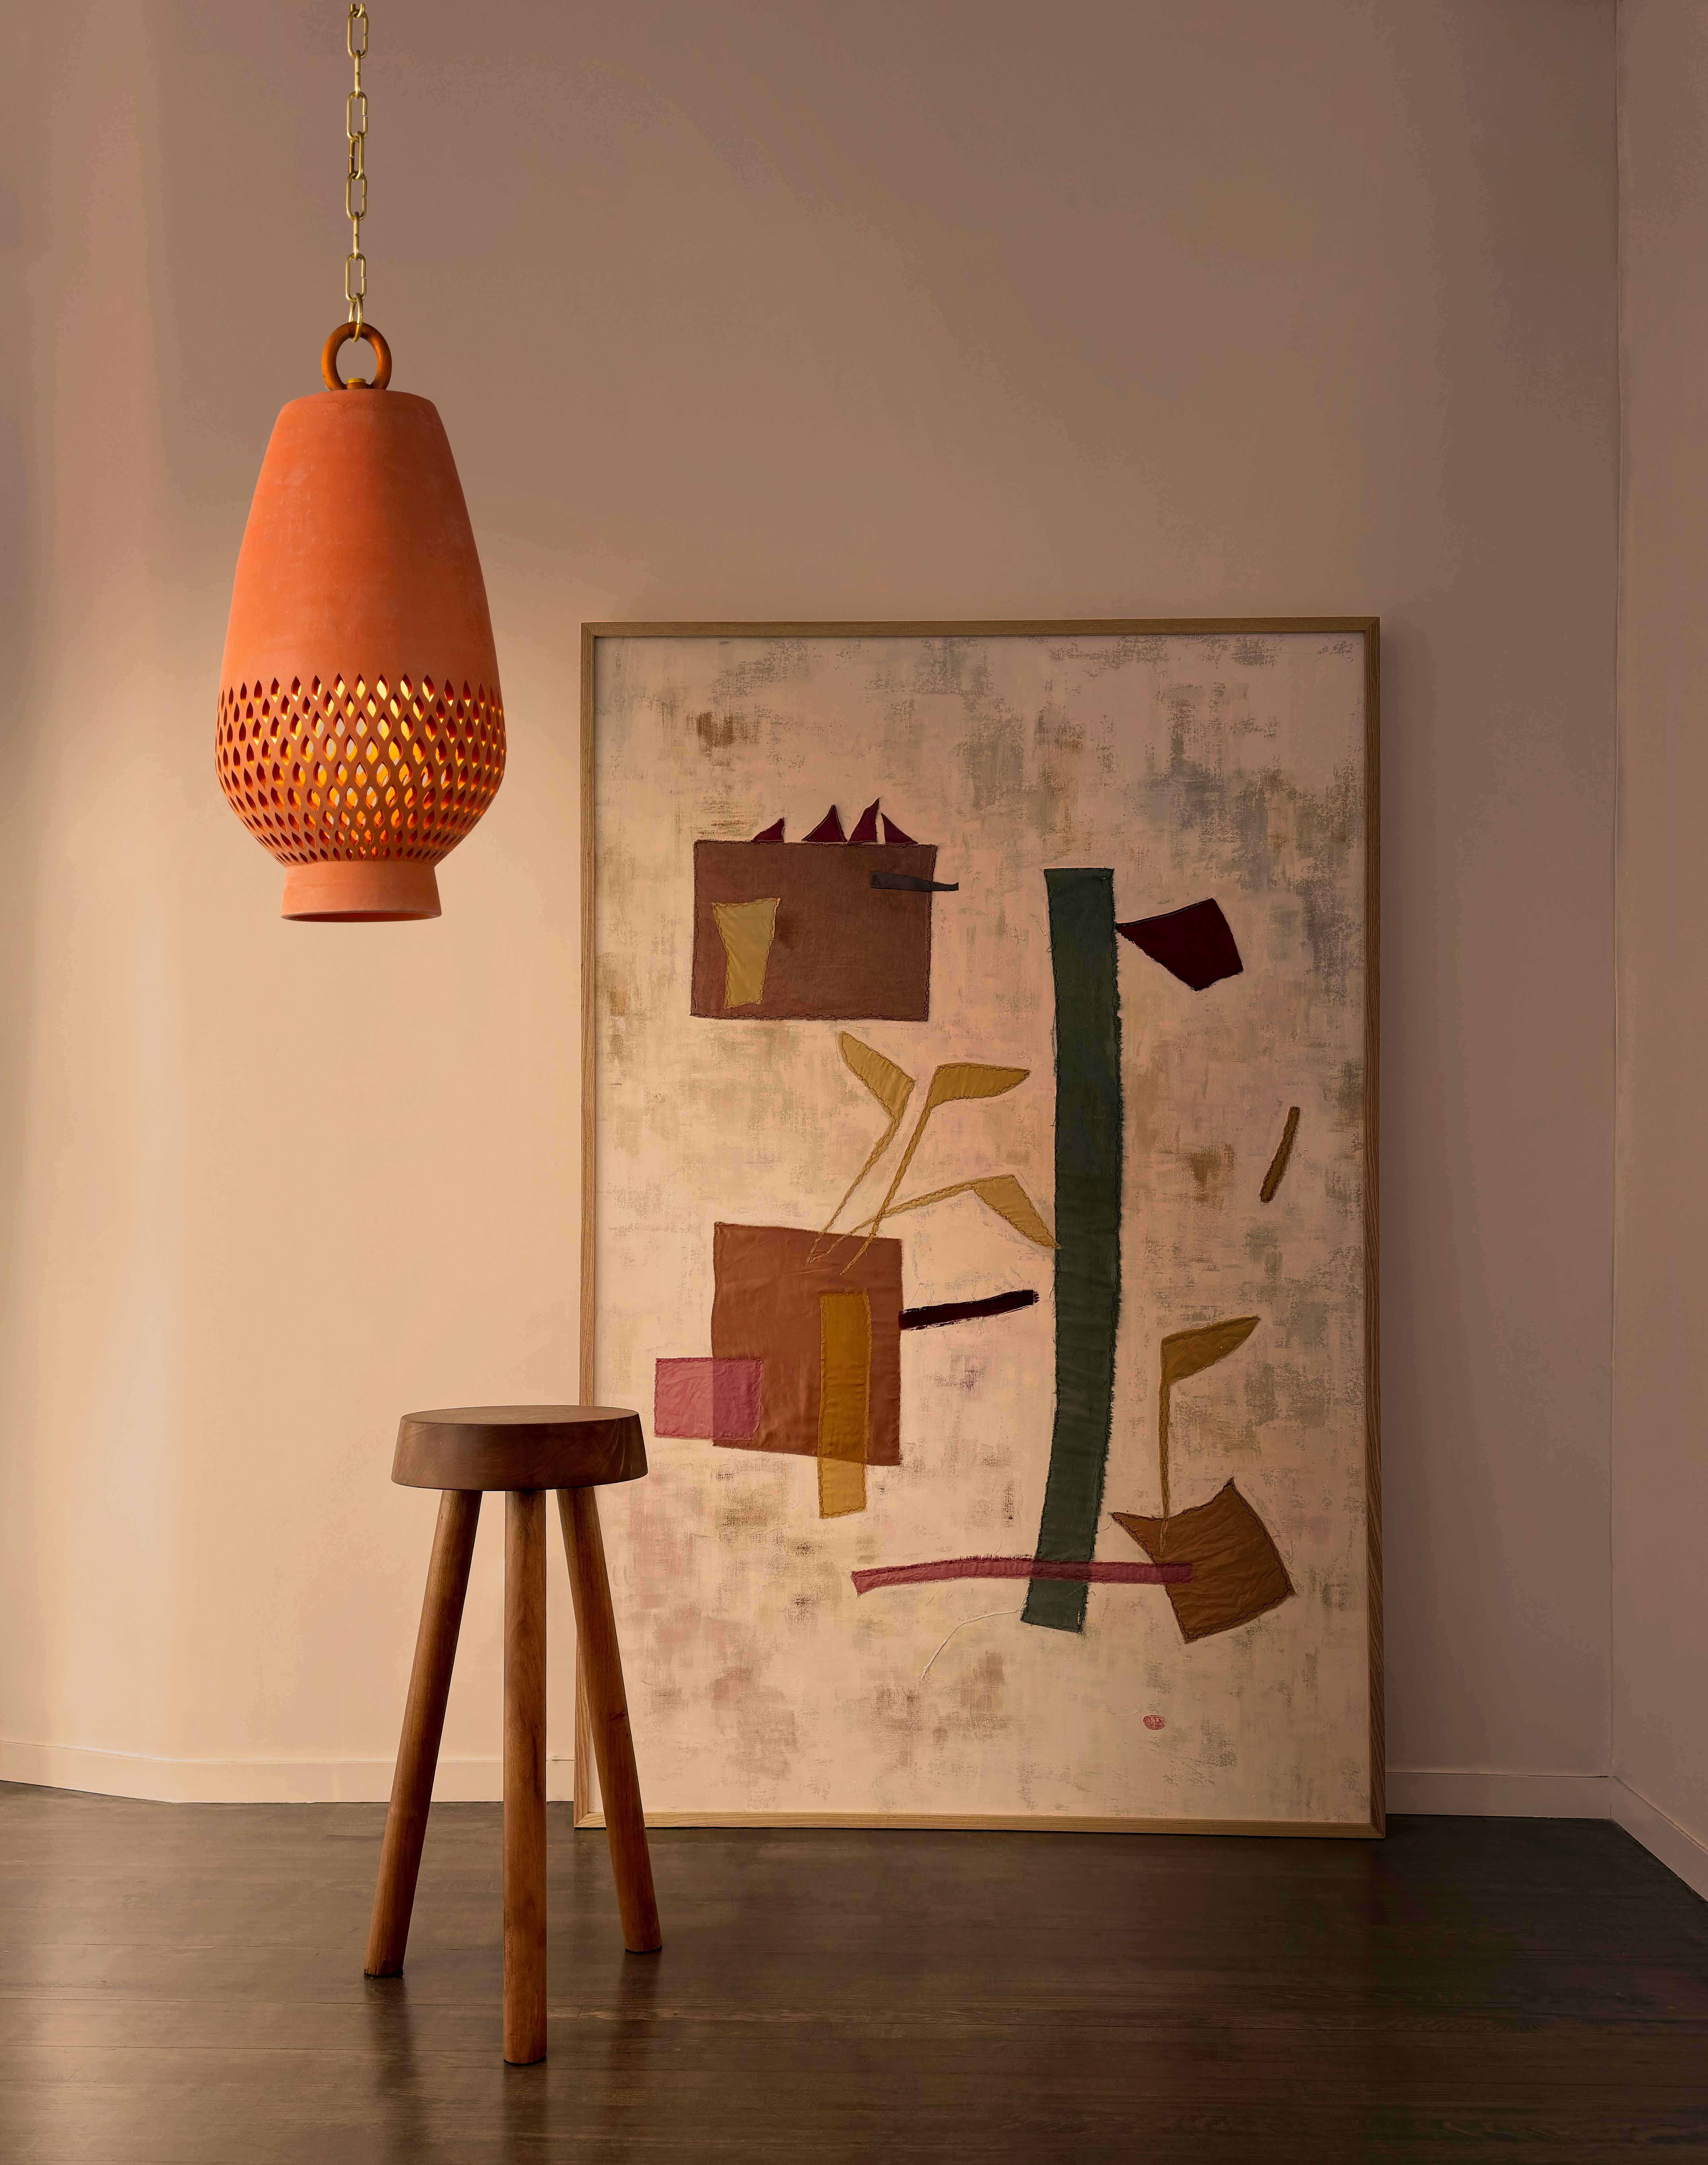 Hand-Crafted Small Terracotta Ceramic Pendant Light, Brushed Brass, Ajedrez Atzompa For Sale